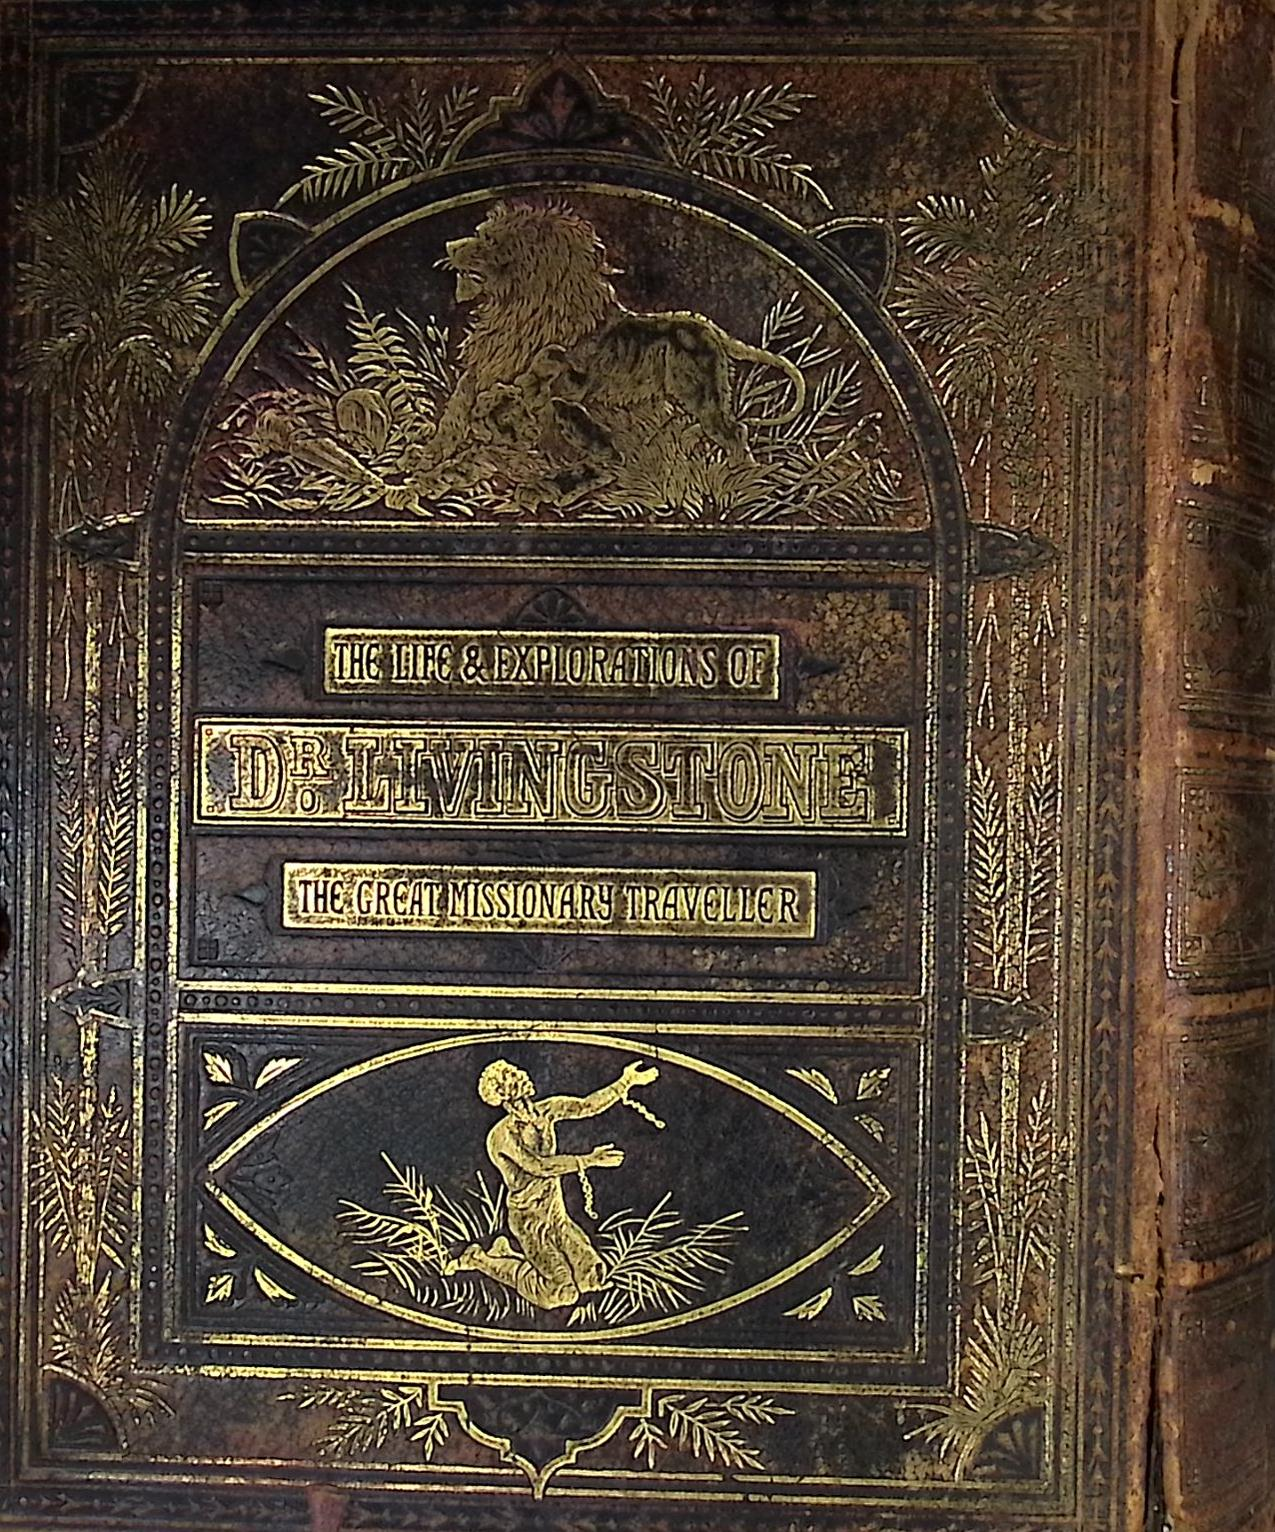 The Life and Explorations of Dr Livingstone. Carefully Compiled from Original Sources. Adam edition. 1876.